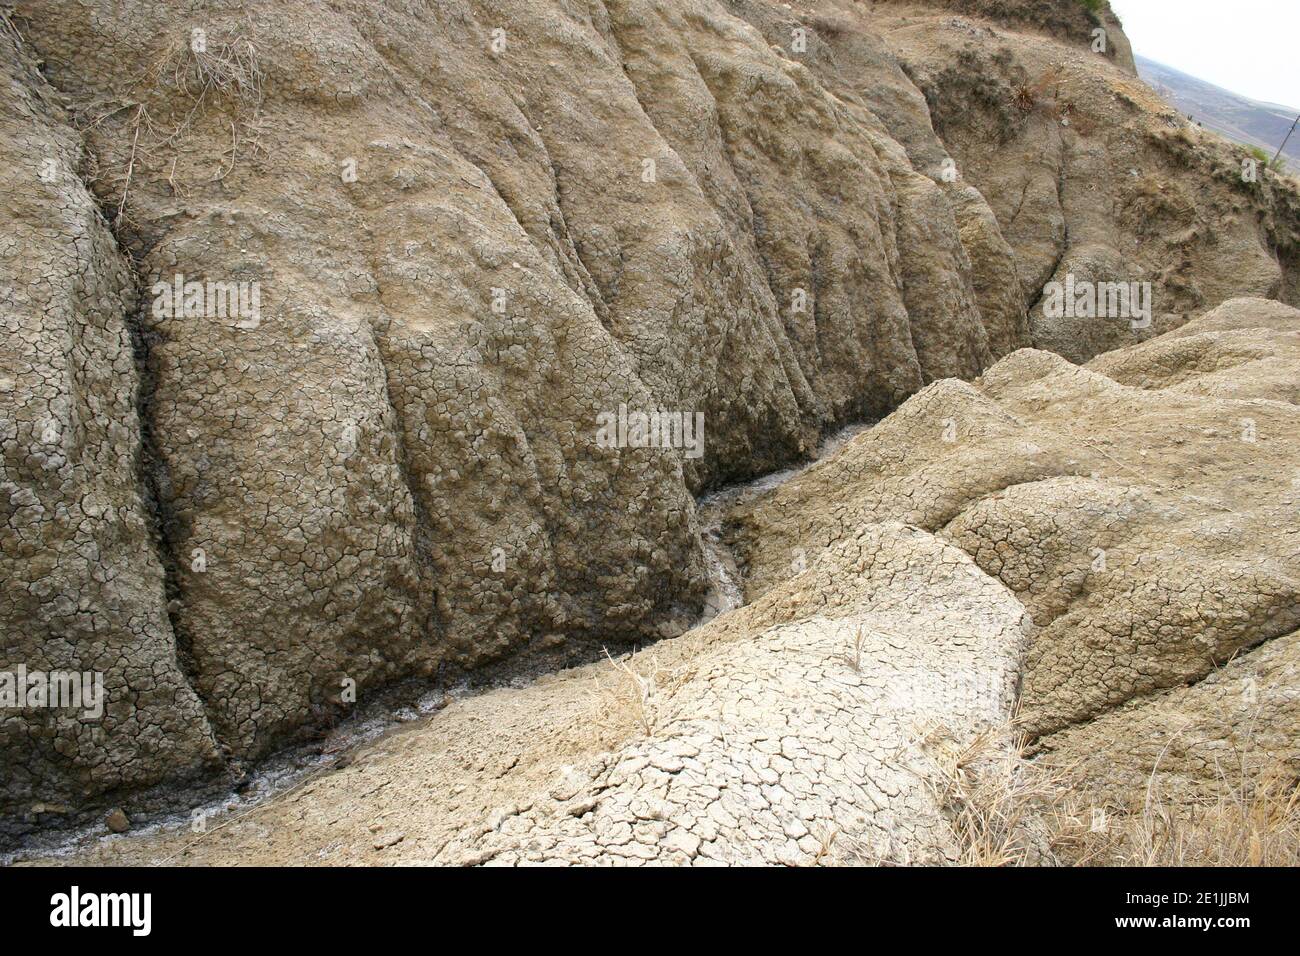 Buzau County, Romania. Landscape formed by the mud volcanoes (vulcanii noroiosi). Stock Photo